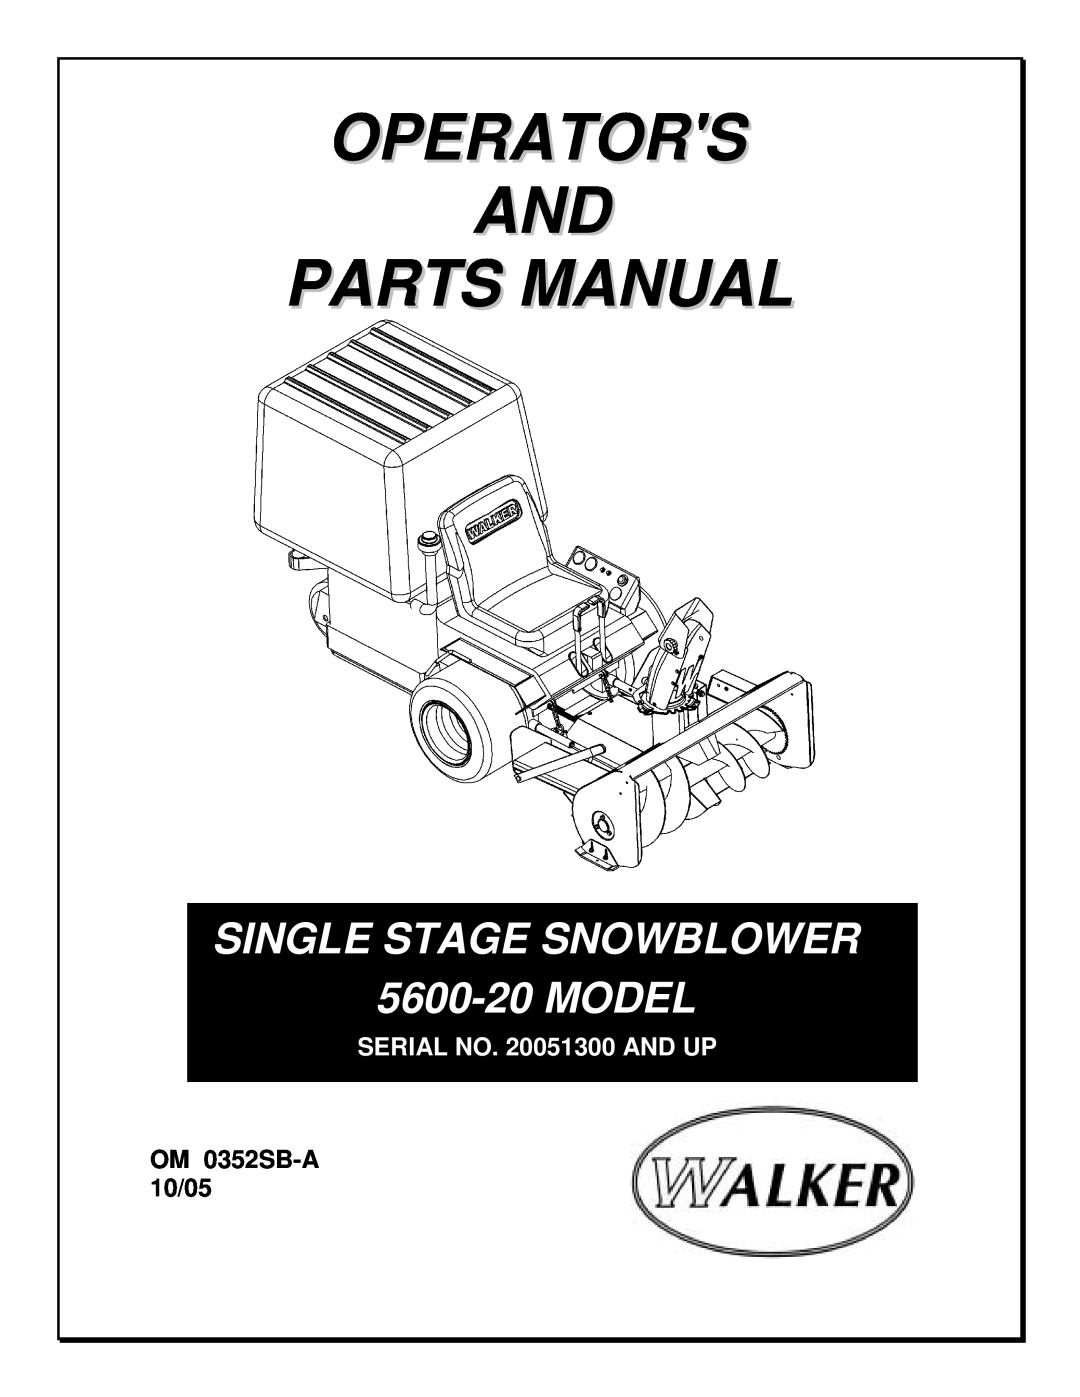 Walker manual OM 0352SB-A10/05, Operators And Parts Manual, SINGLE STAGE SNOWBLOWER 5600-20MODEL 